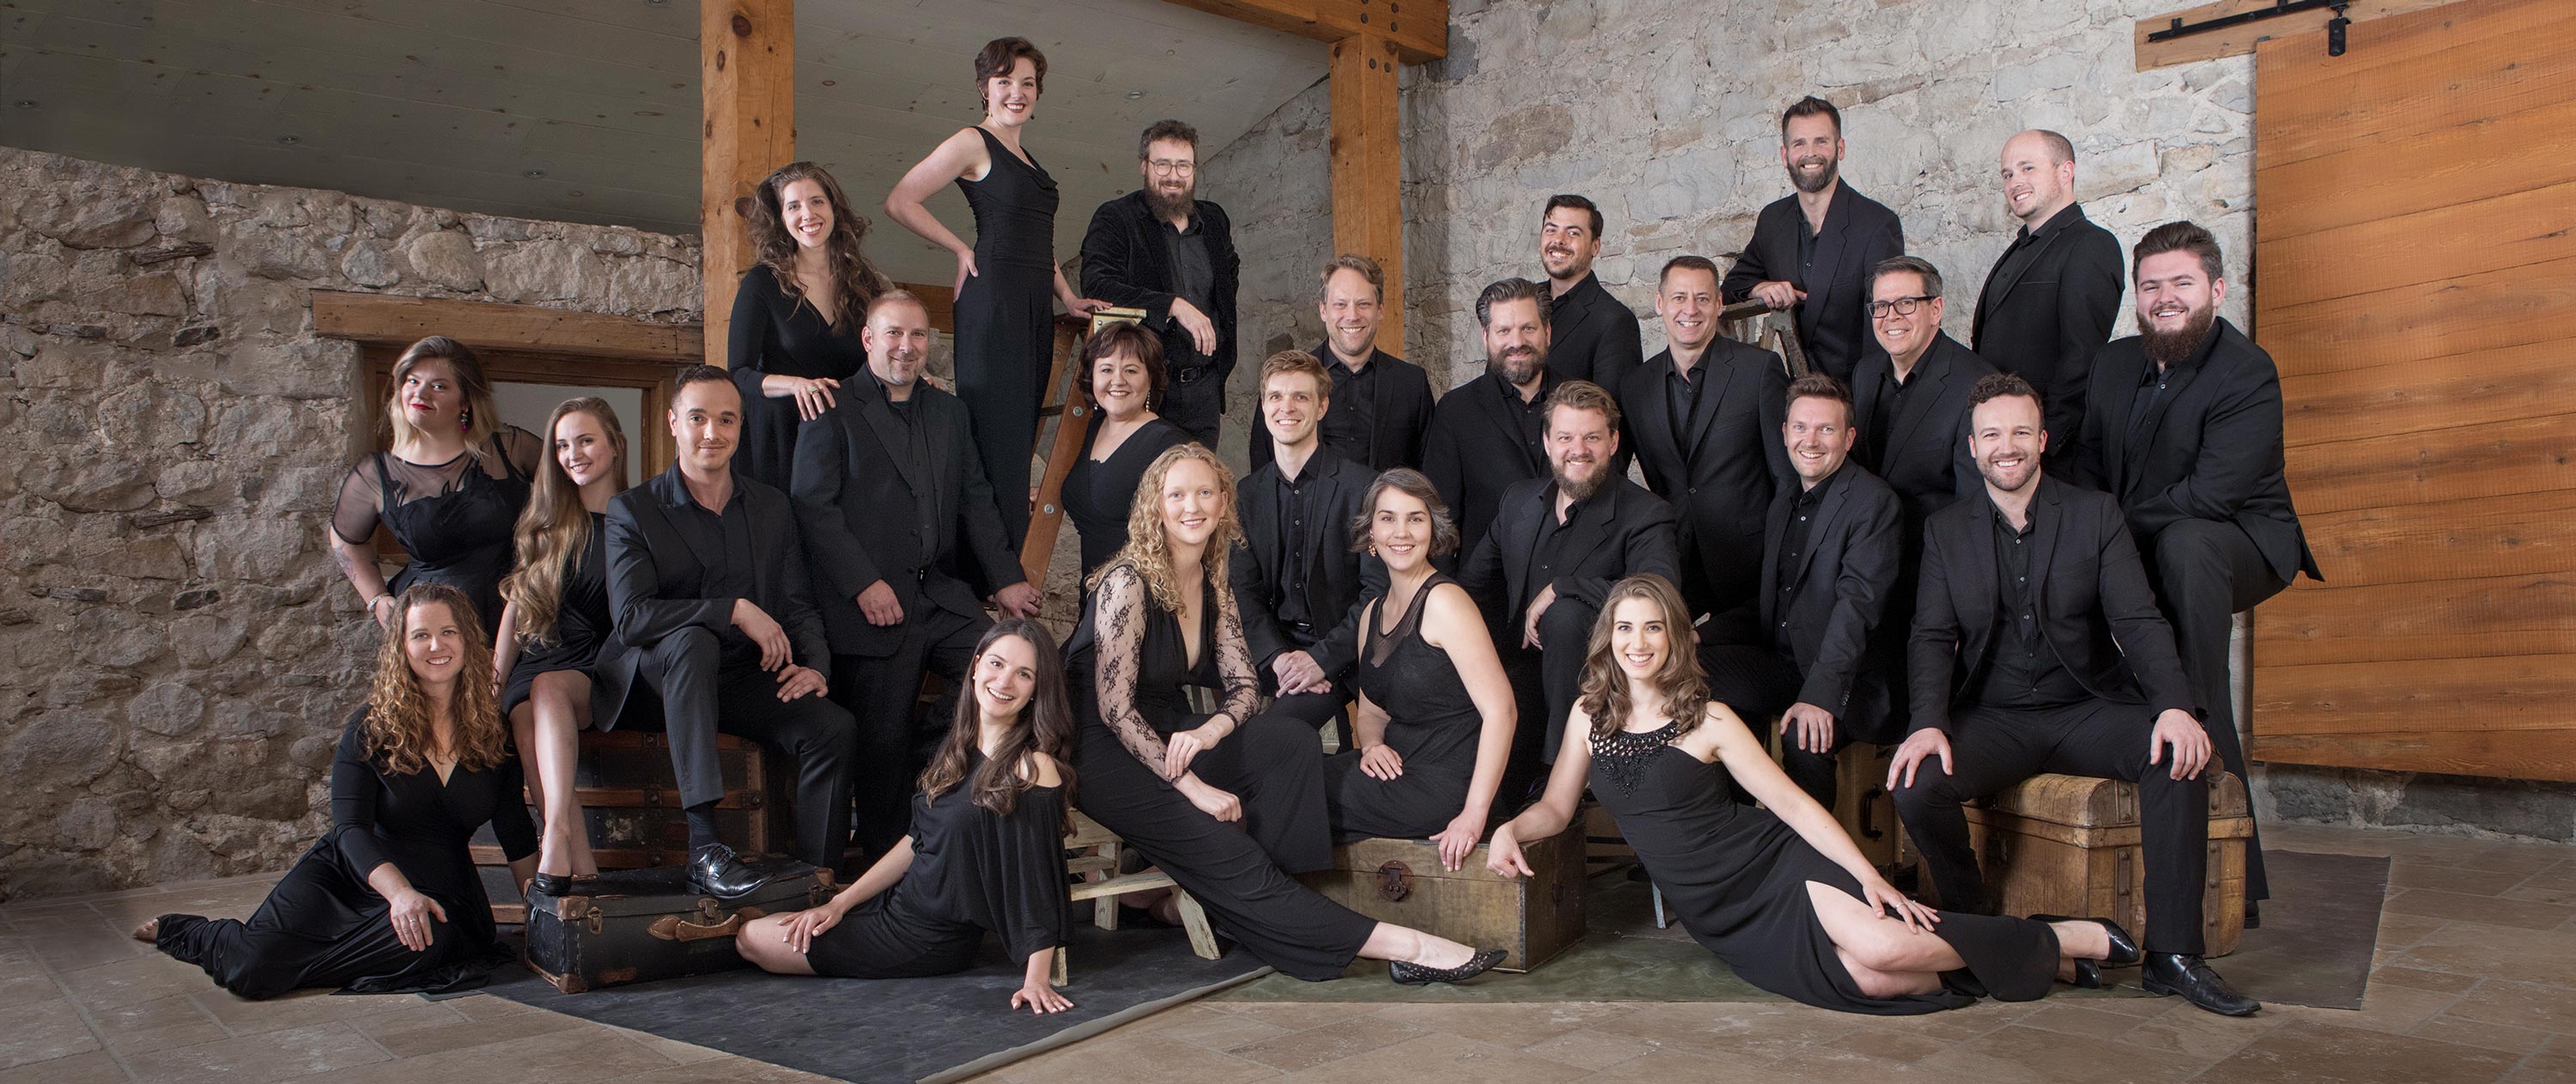 A group picture of The Elora Singers